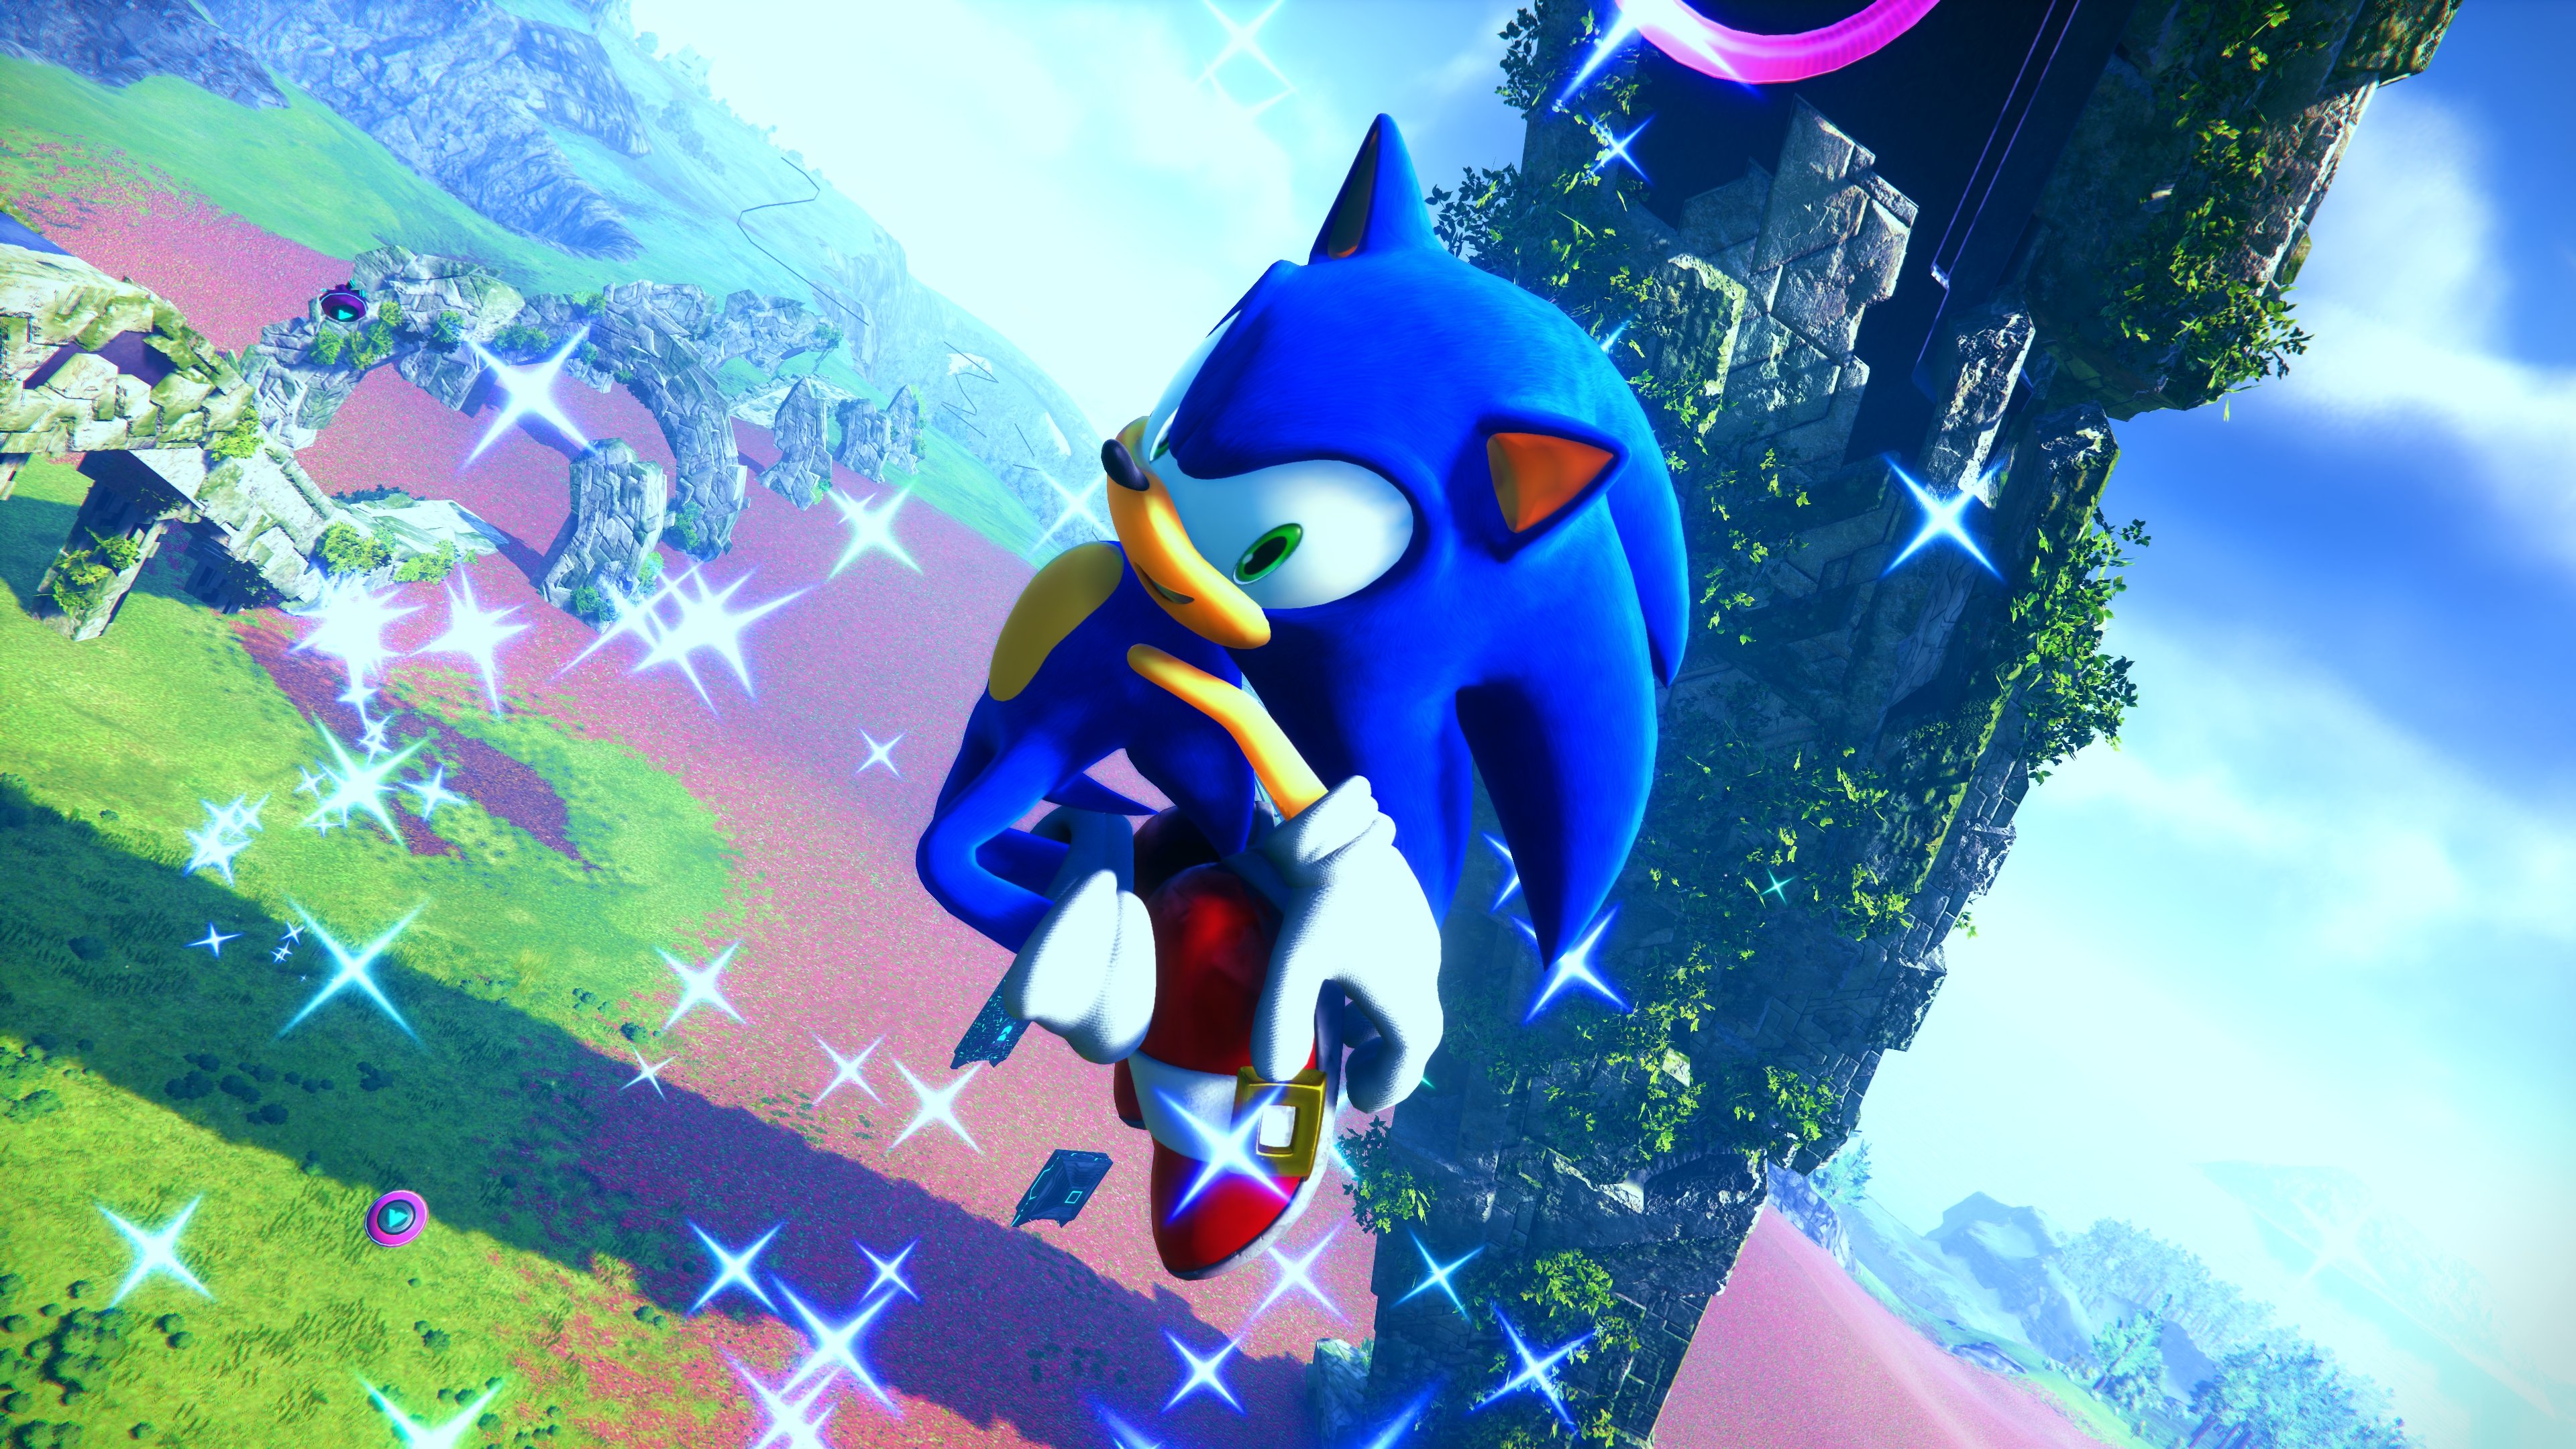 Sonic Frontiers still has a long way to go despite being released